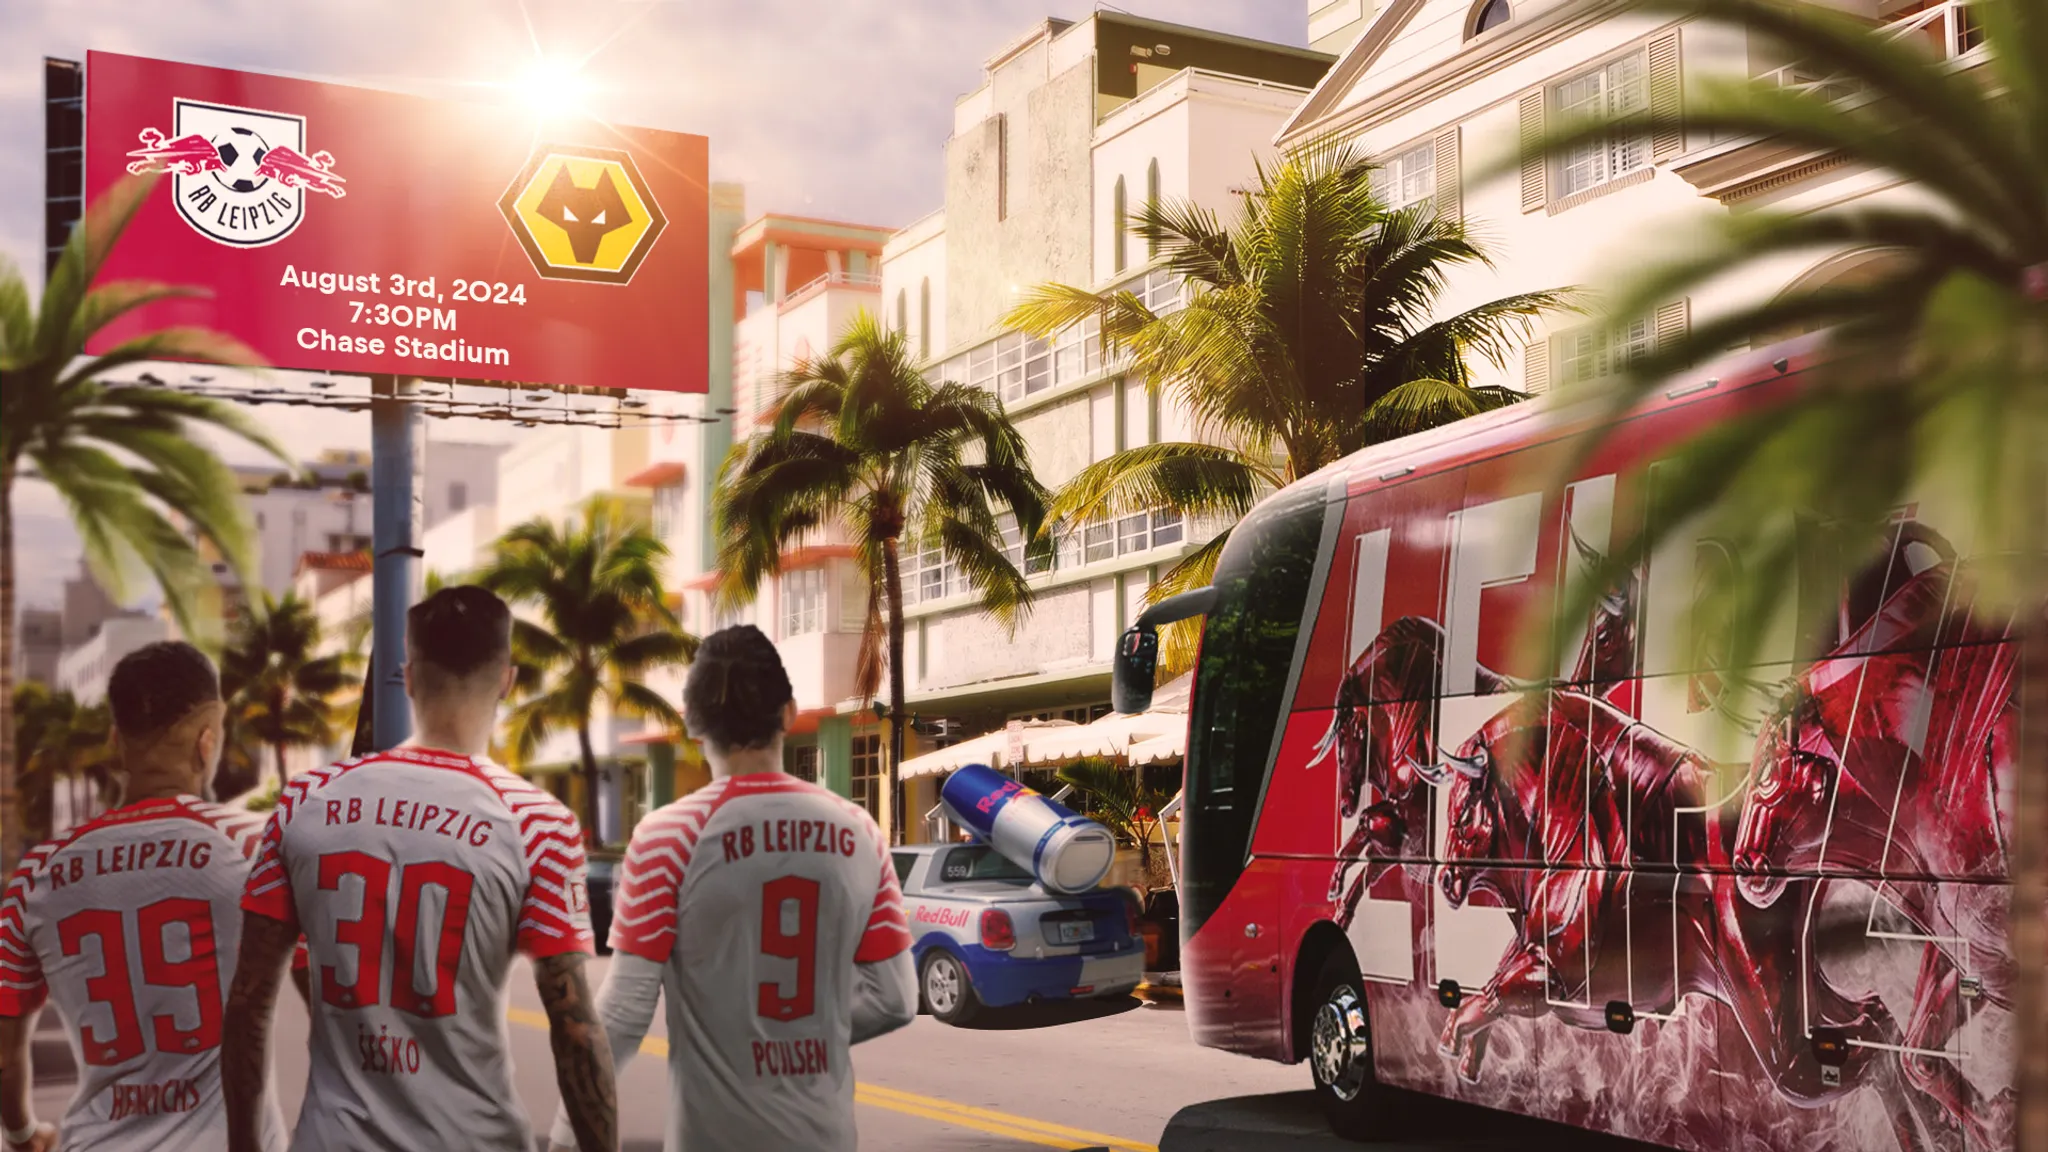 RB Leipzig plays 2nd test match on the US tour in Miami against Wolverhampton Wanderers